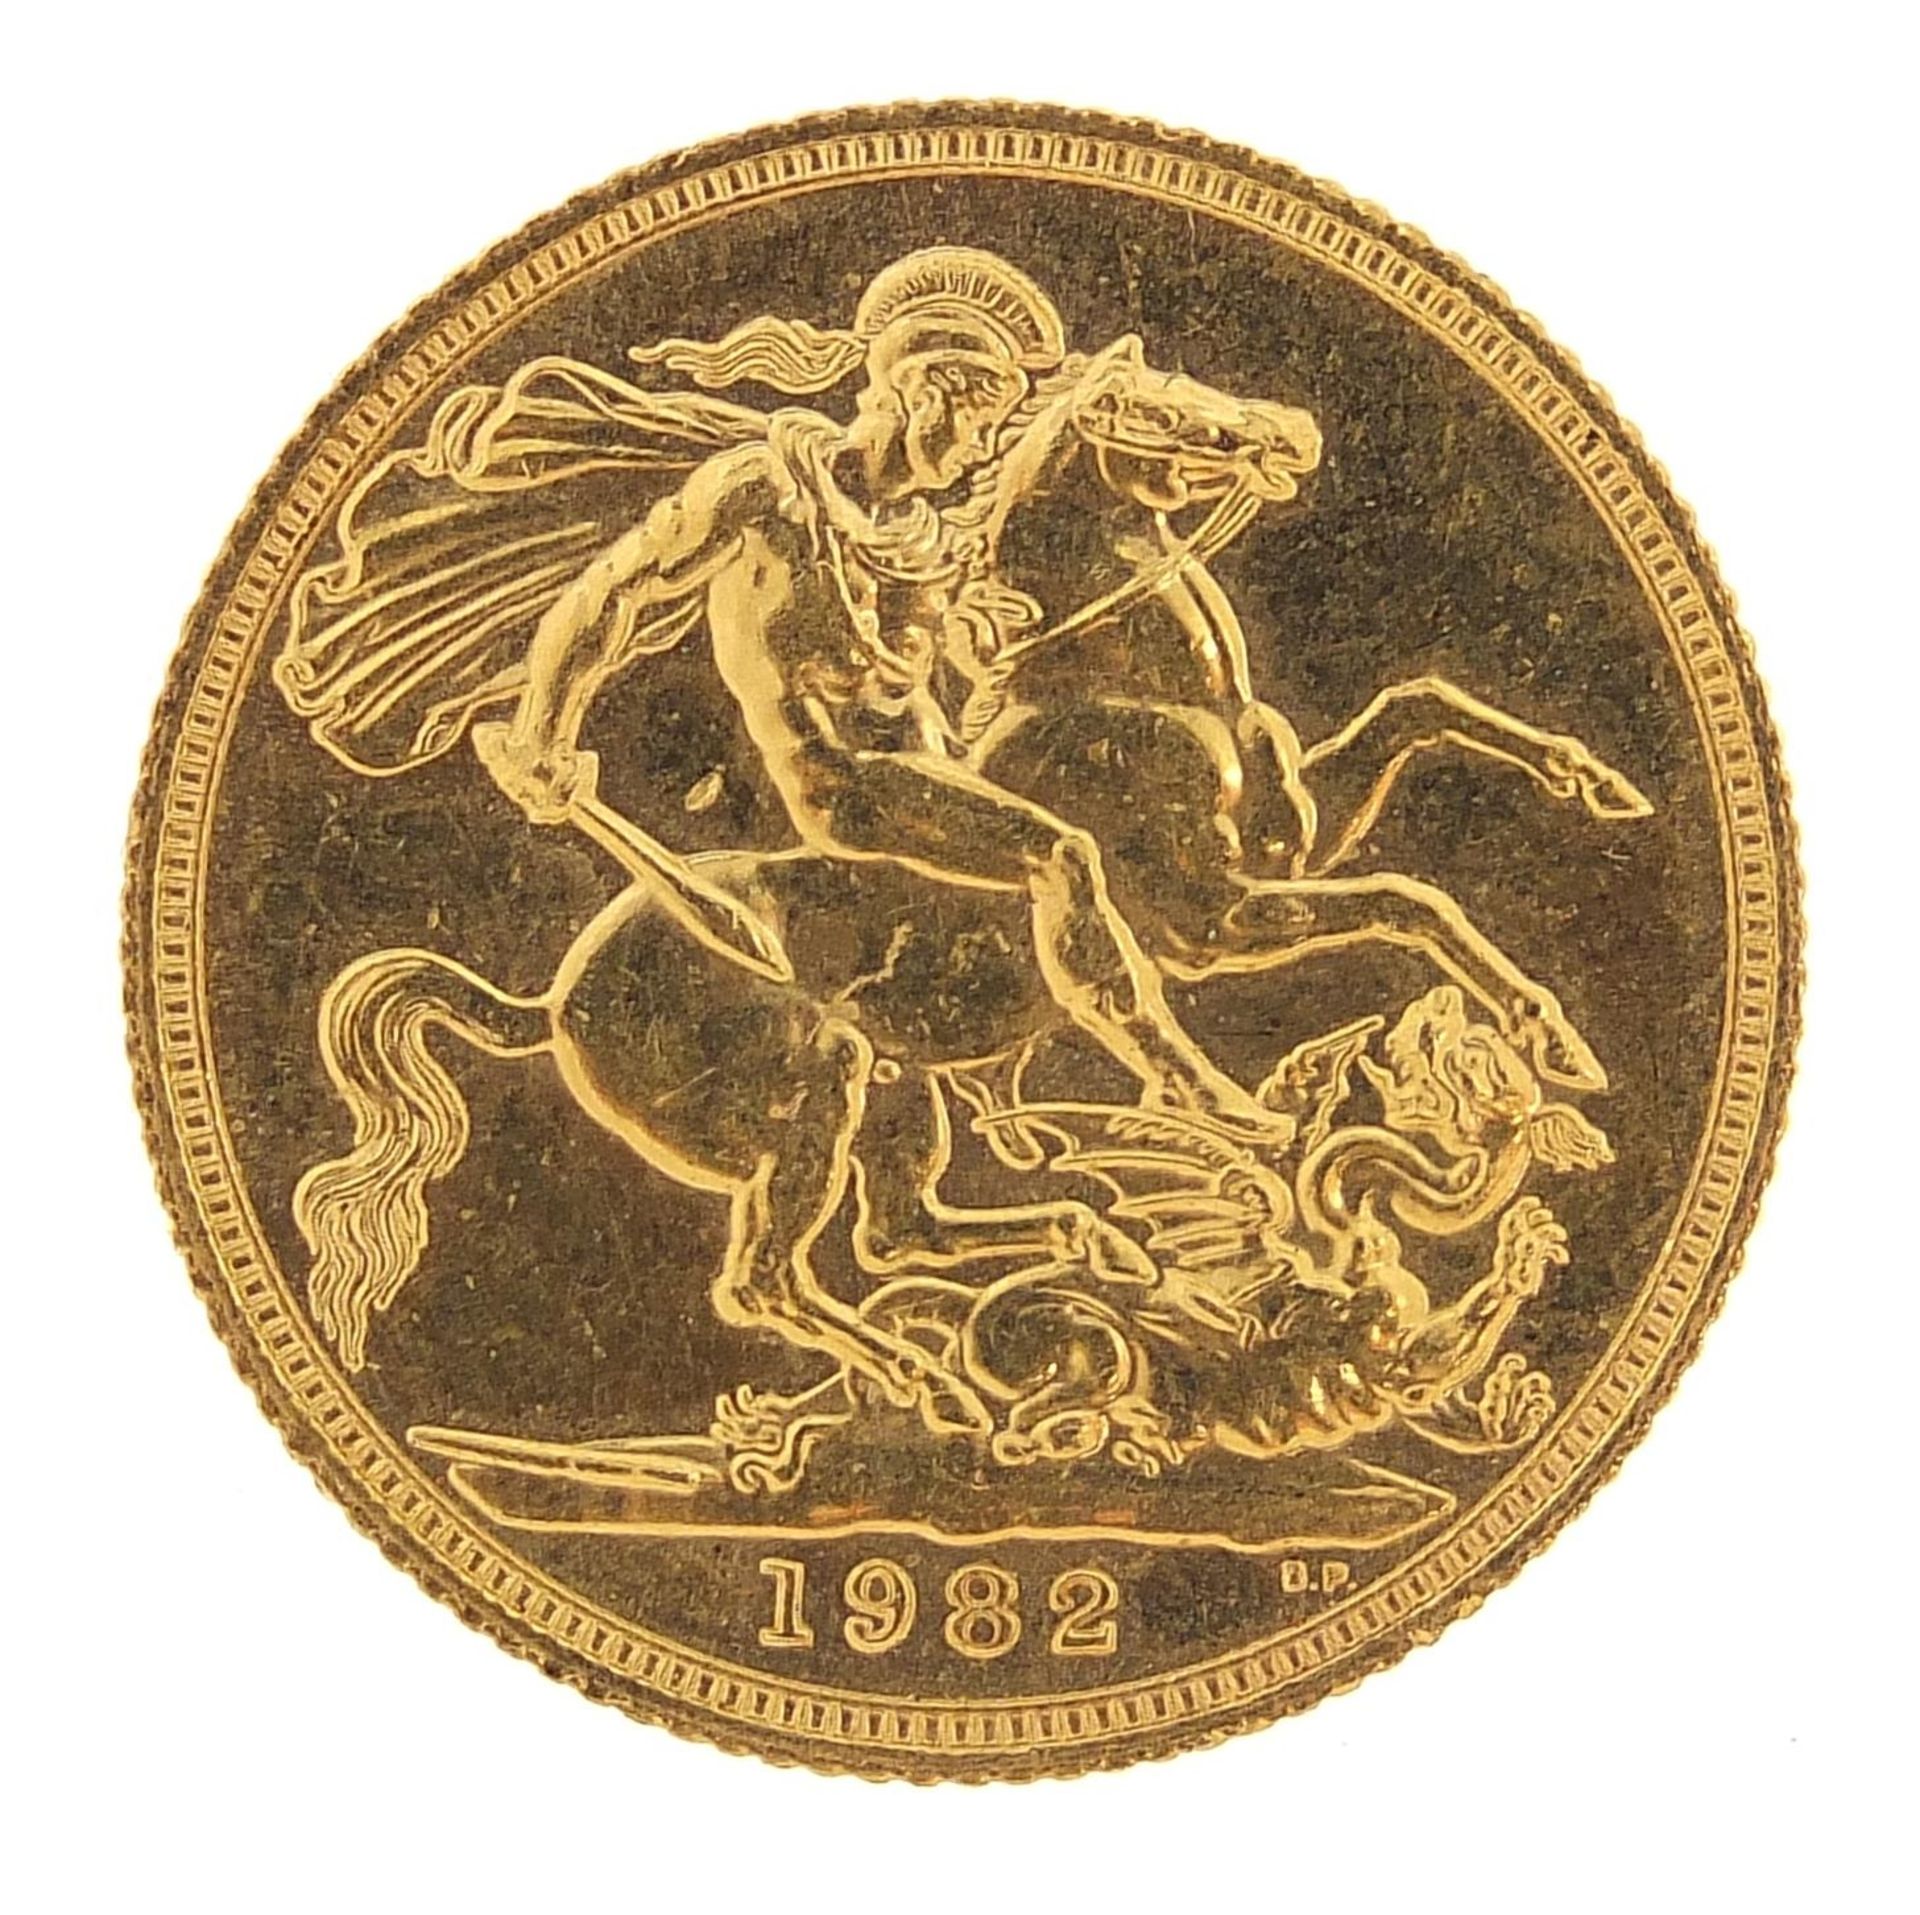 Elizabeth II 1982 gold sovereign - this lot is sold without buyer's premium